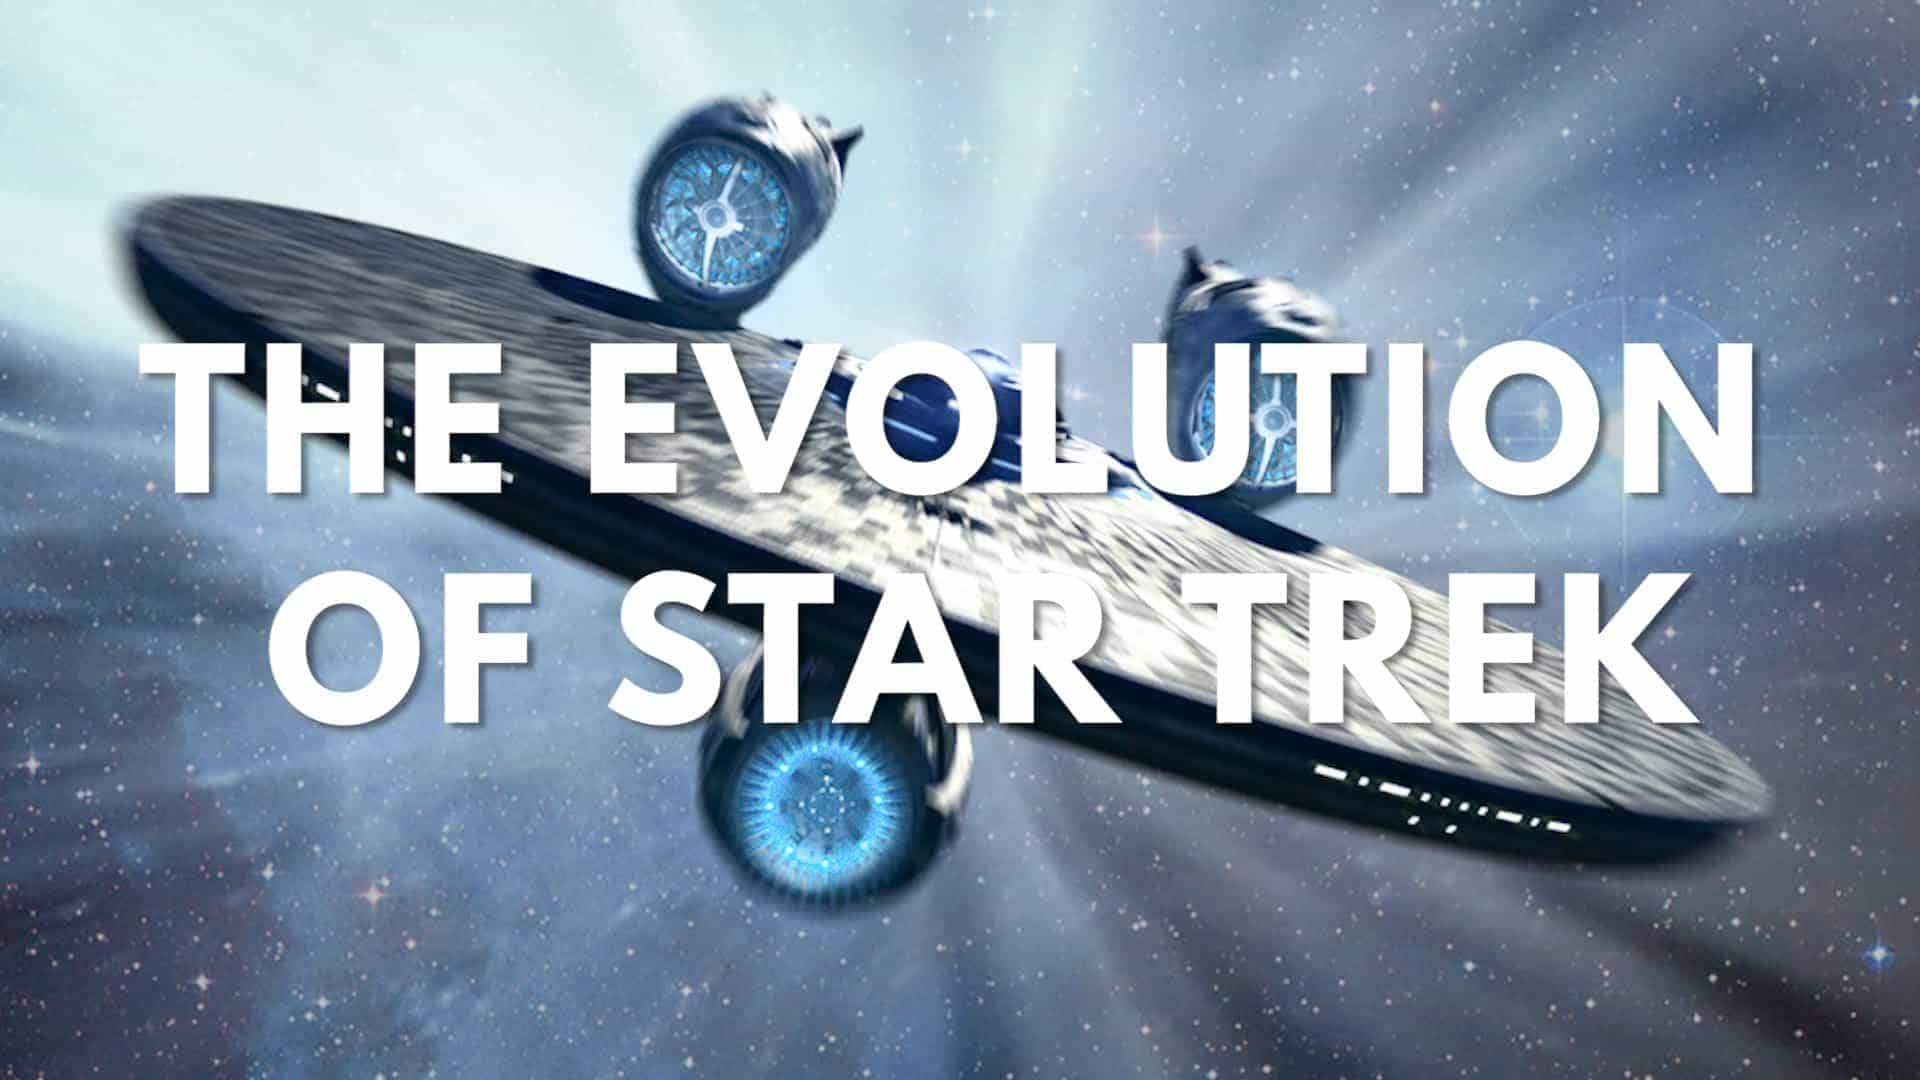 The evolution of Star Trek in film and television